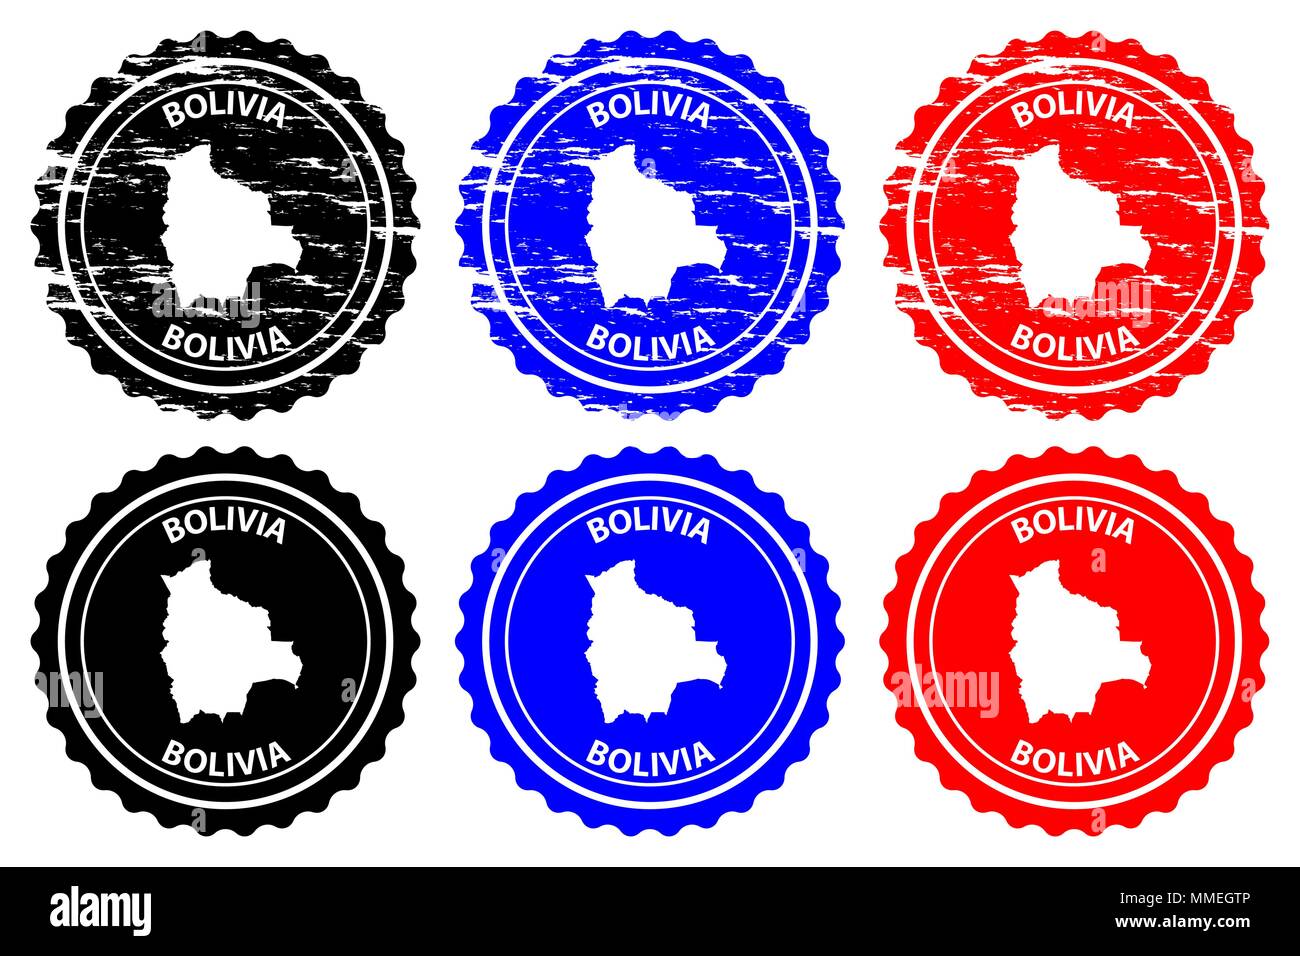 Bolivia - rubber stamp - vector, Bolivia map pattern - sticker - black, blue and red Stock Vector